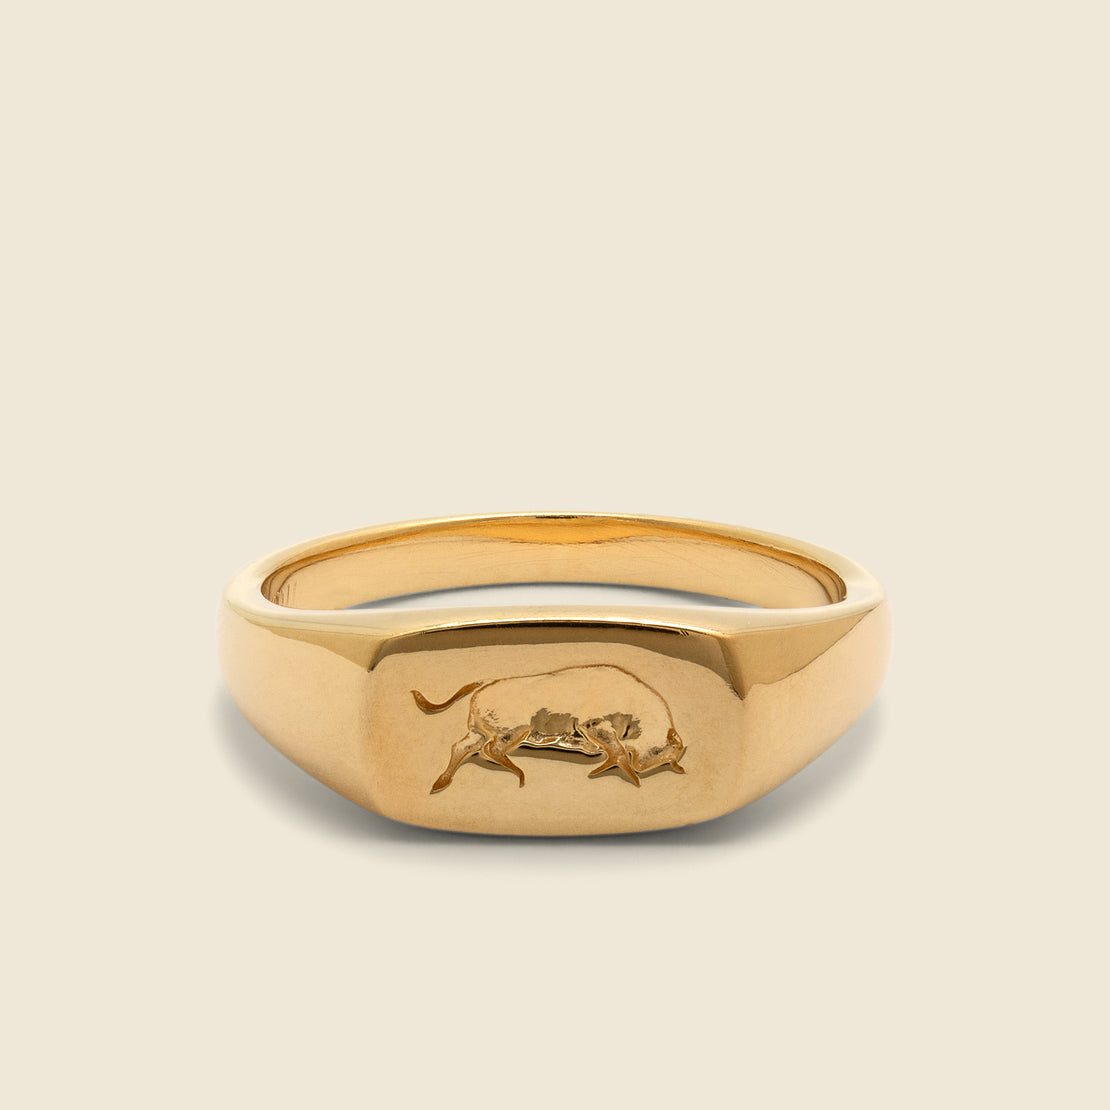 Oxen Ring - Gold Vermeil - Miansai - STAG Provisions - Accessories - Rings